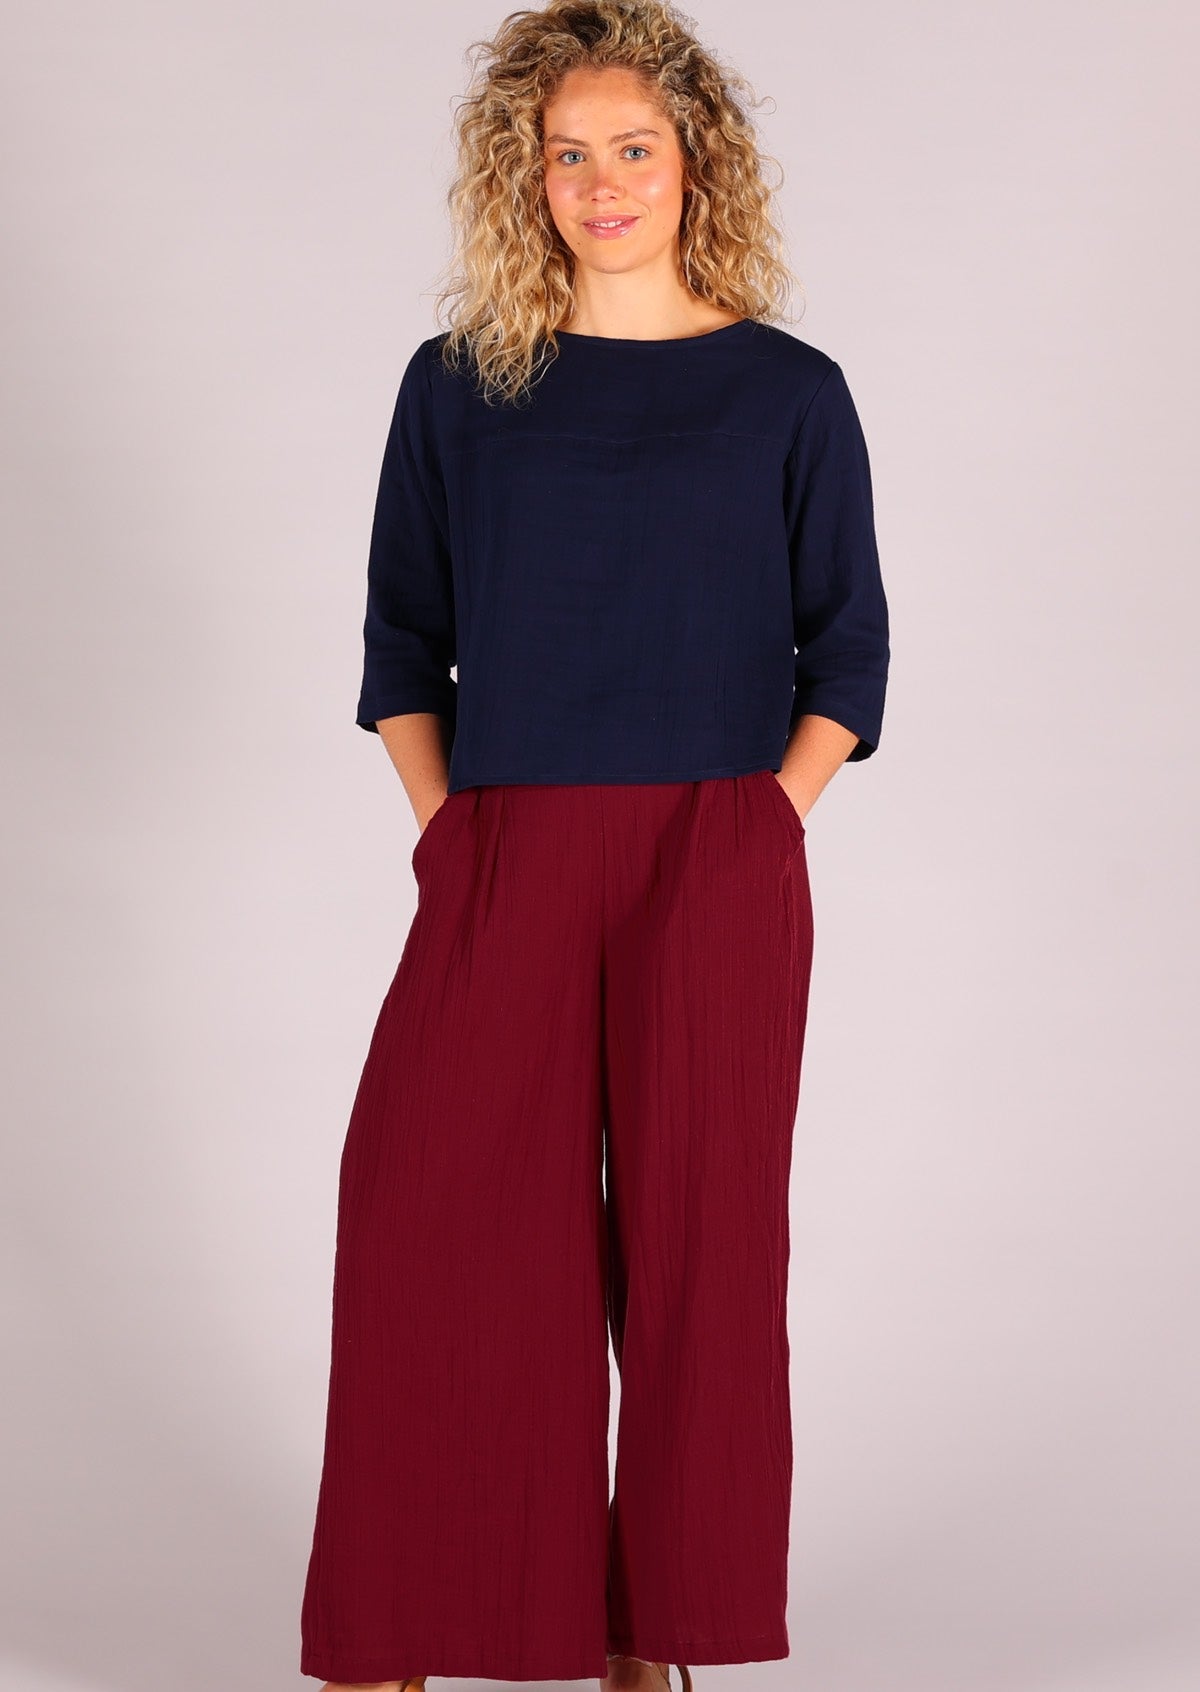 Super comfortable and stylish cotton gauze pants in deep red